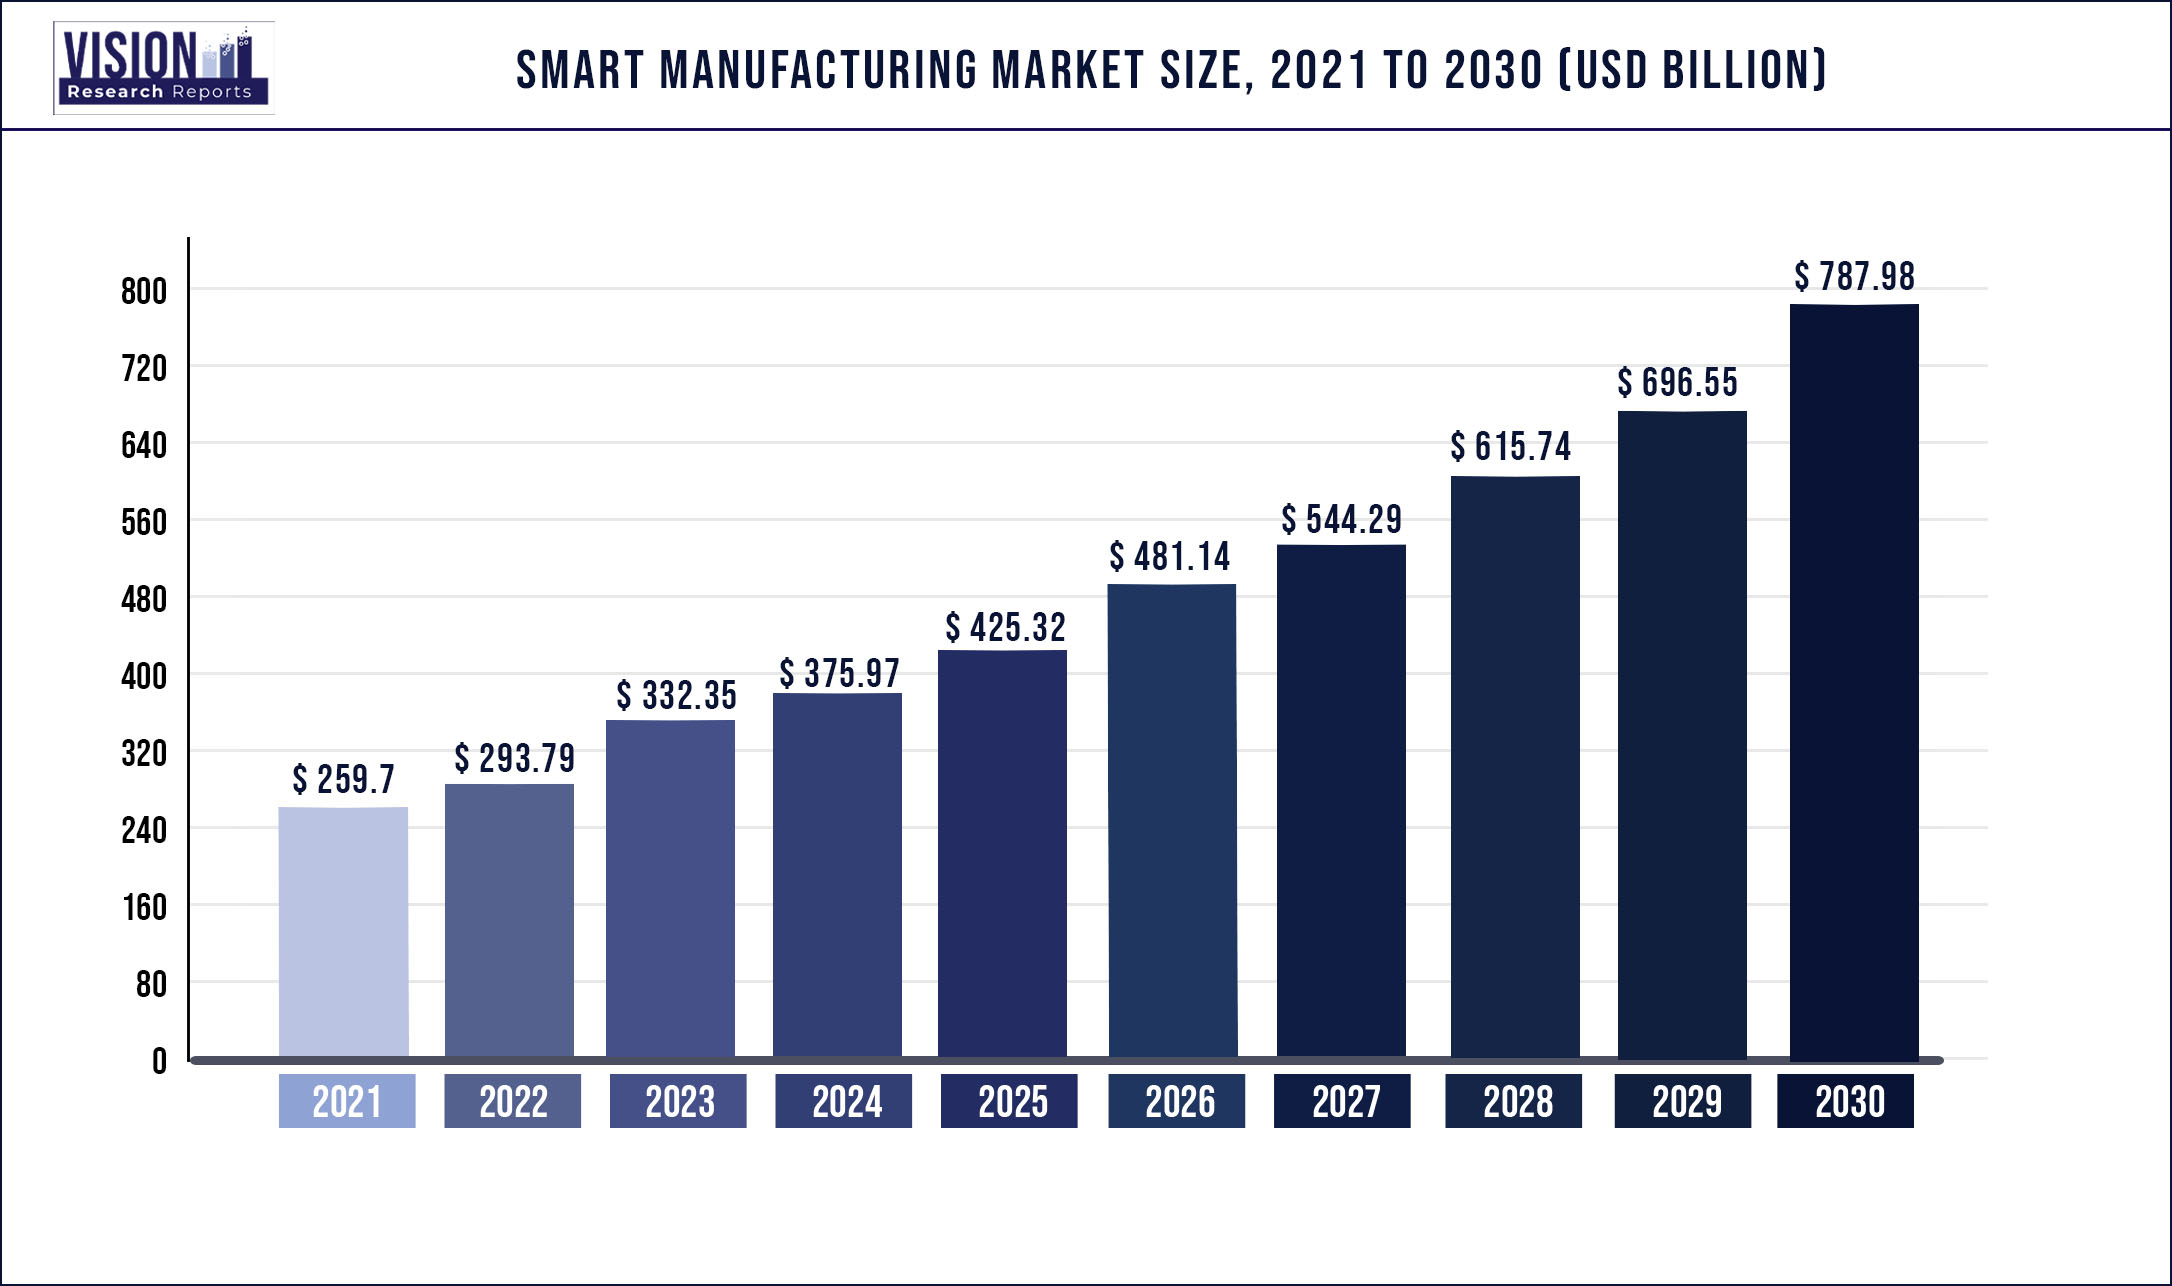 Smart Manufacturing Market Size 2021 to 2030